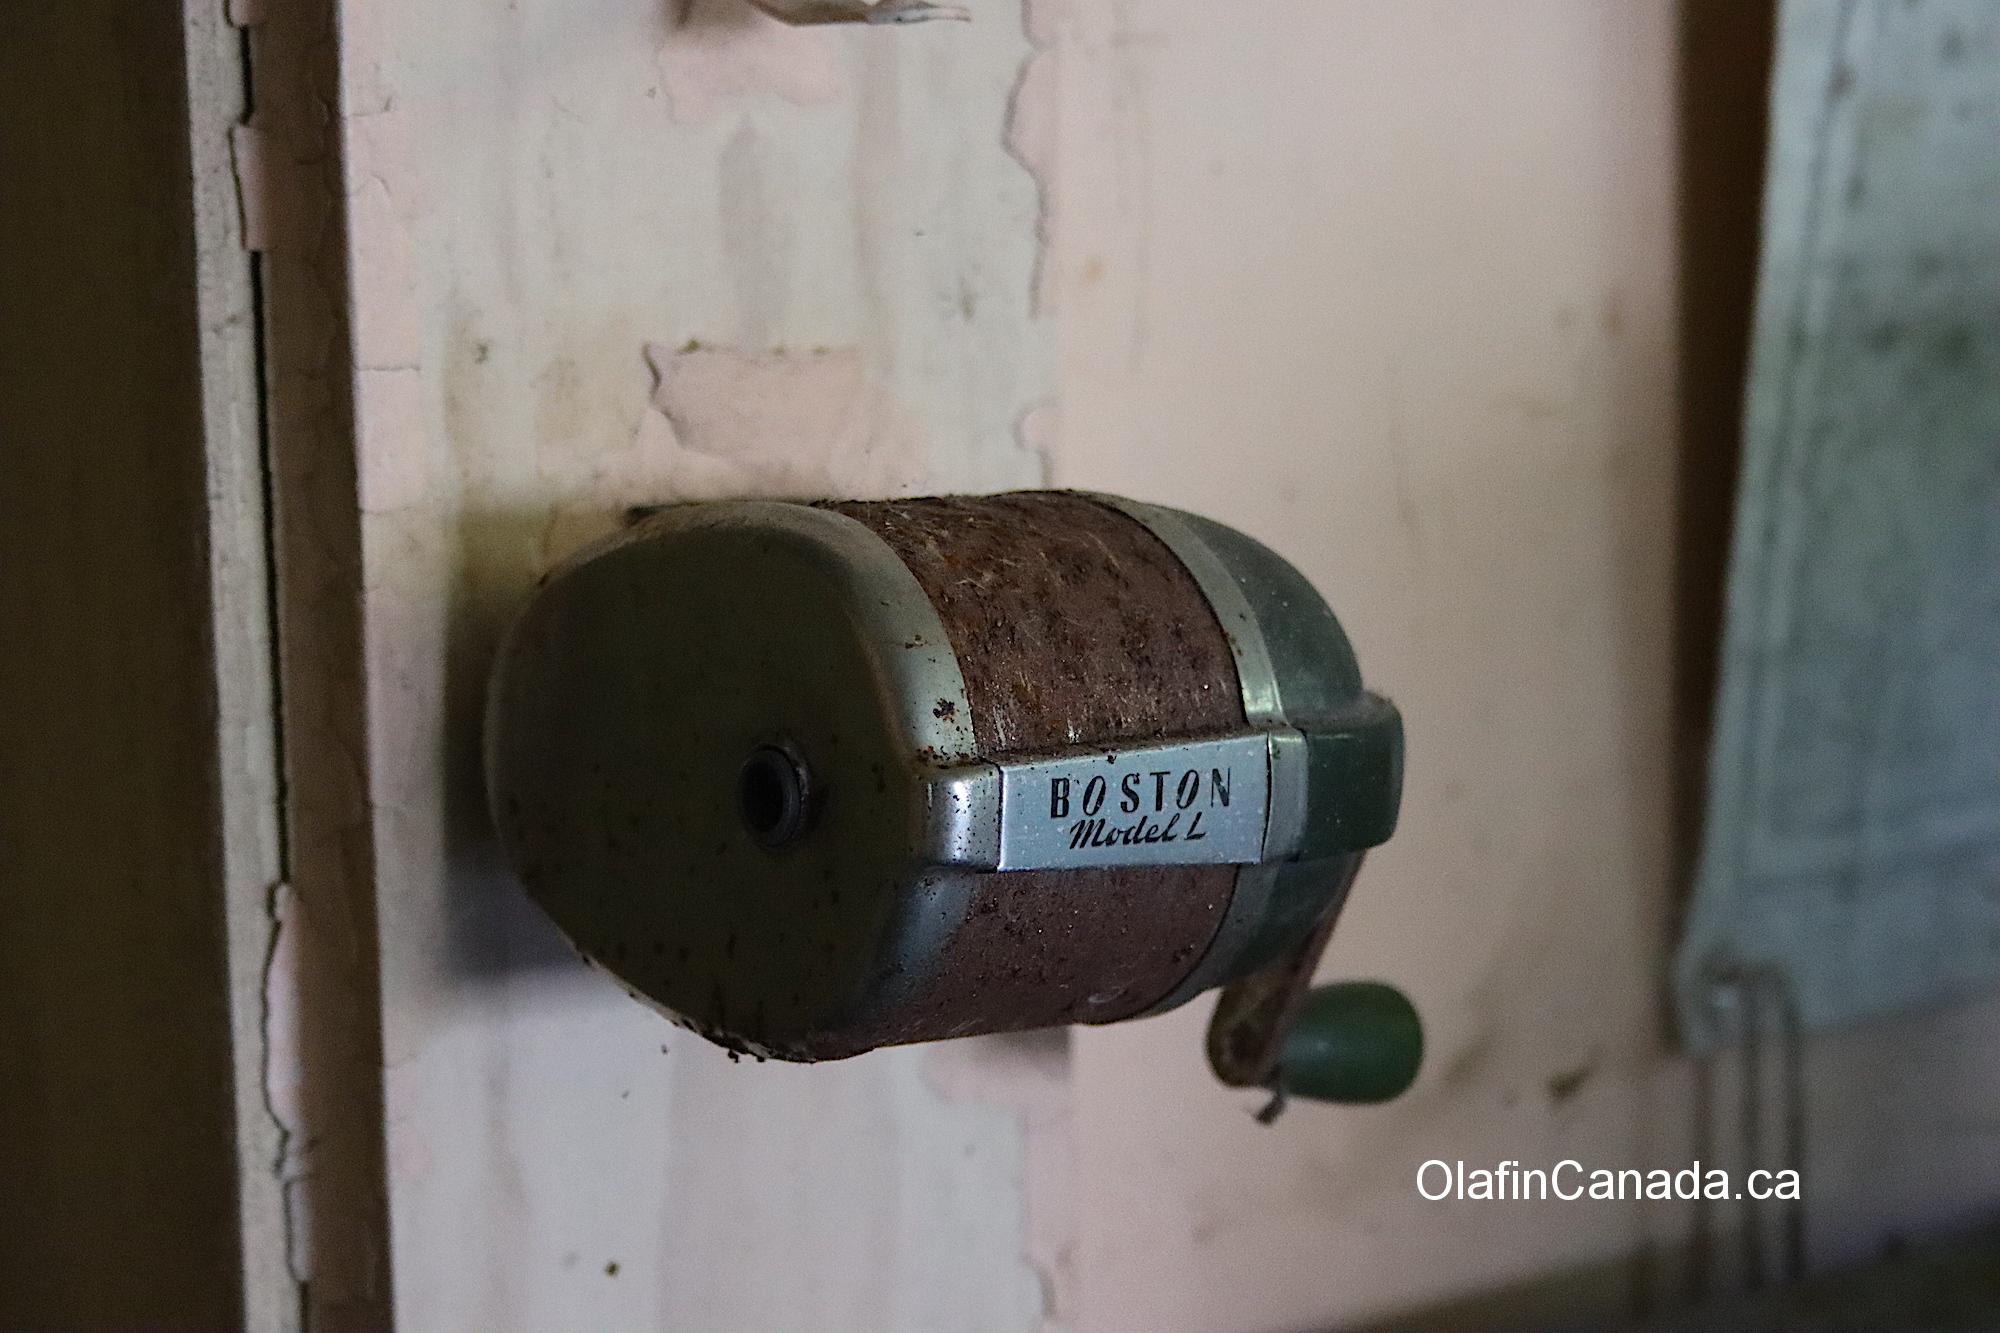 Pencil sharpener in the office of the Tallheo Cannery in Bella Coola #olafincanada #britishcolumbia #discoverbc #abandonedbc #tallheocannery #bellacoola